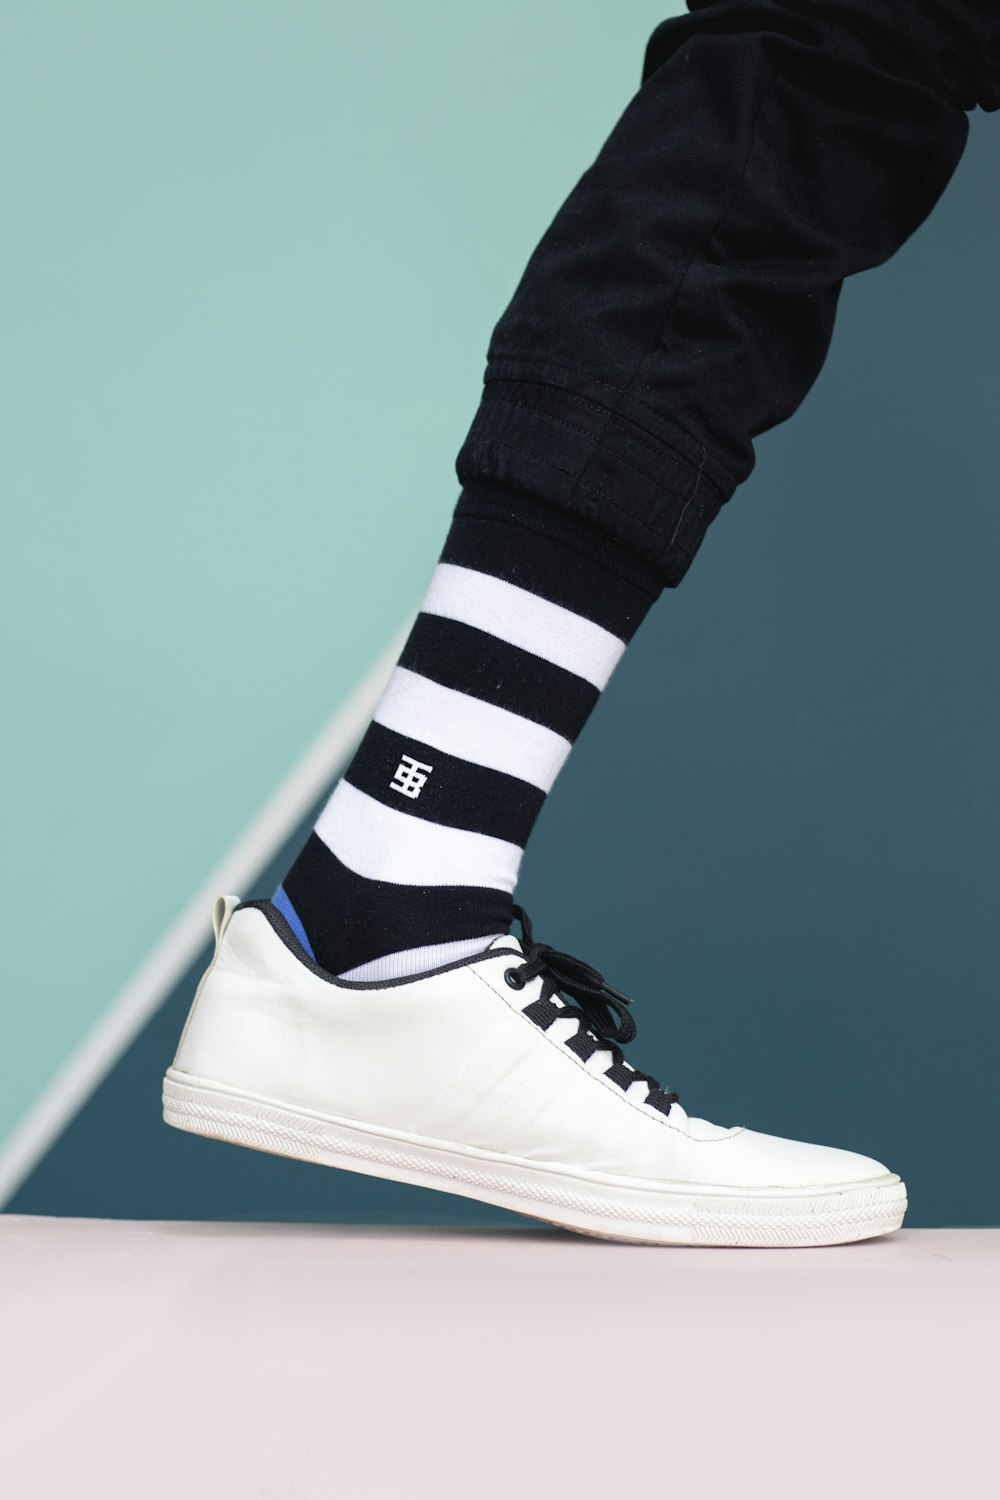 a person wearing black and white striped socks